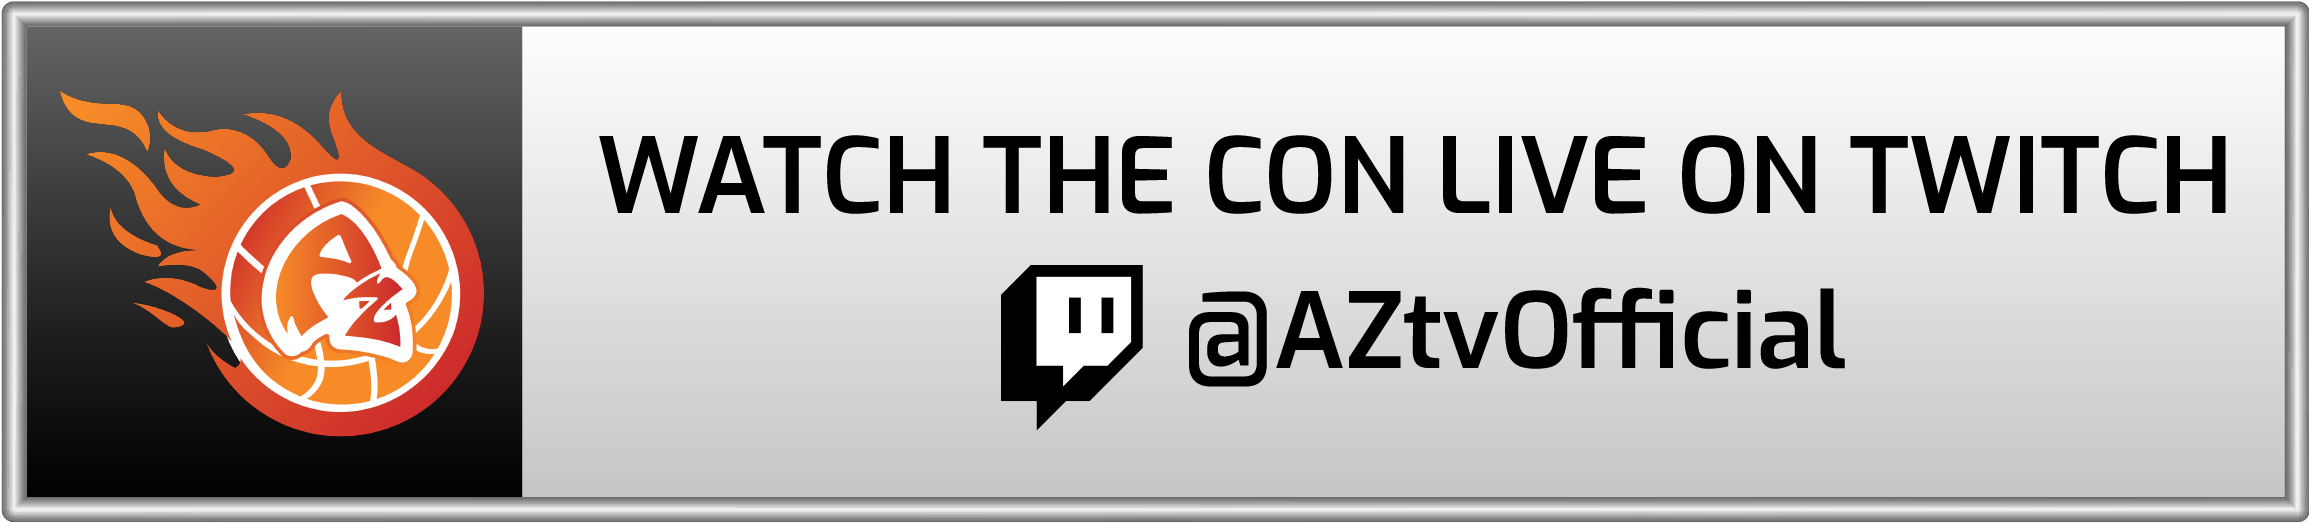 Watch the con live on Twitch @AZtvOfficial